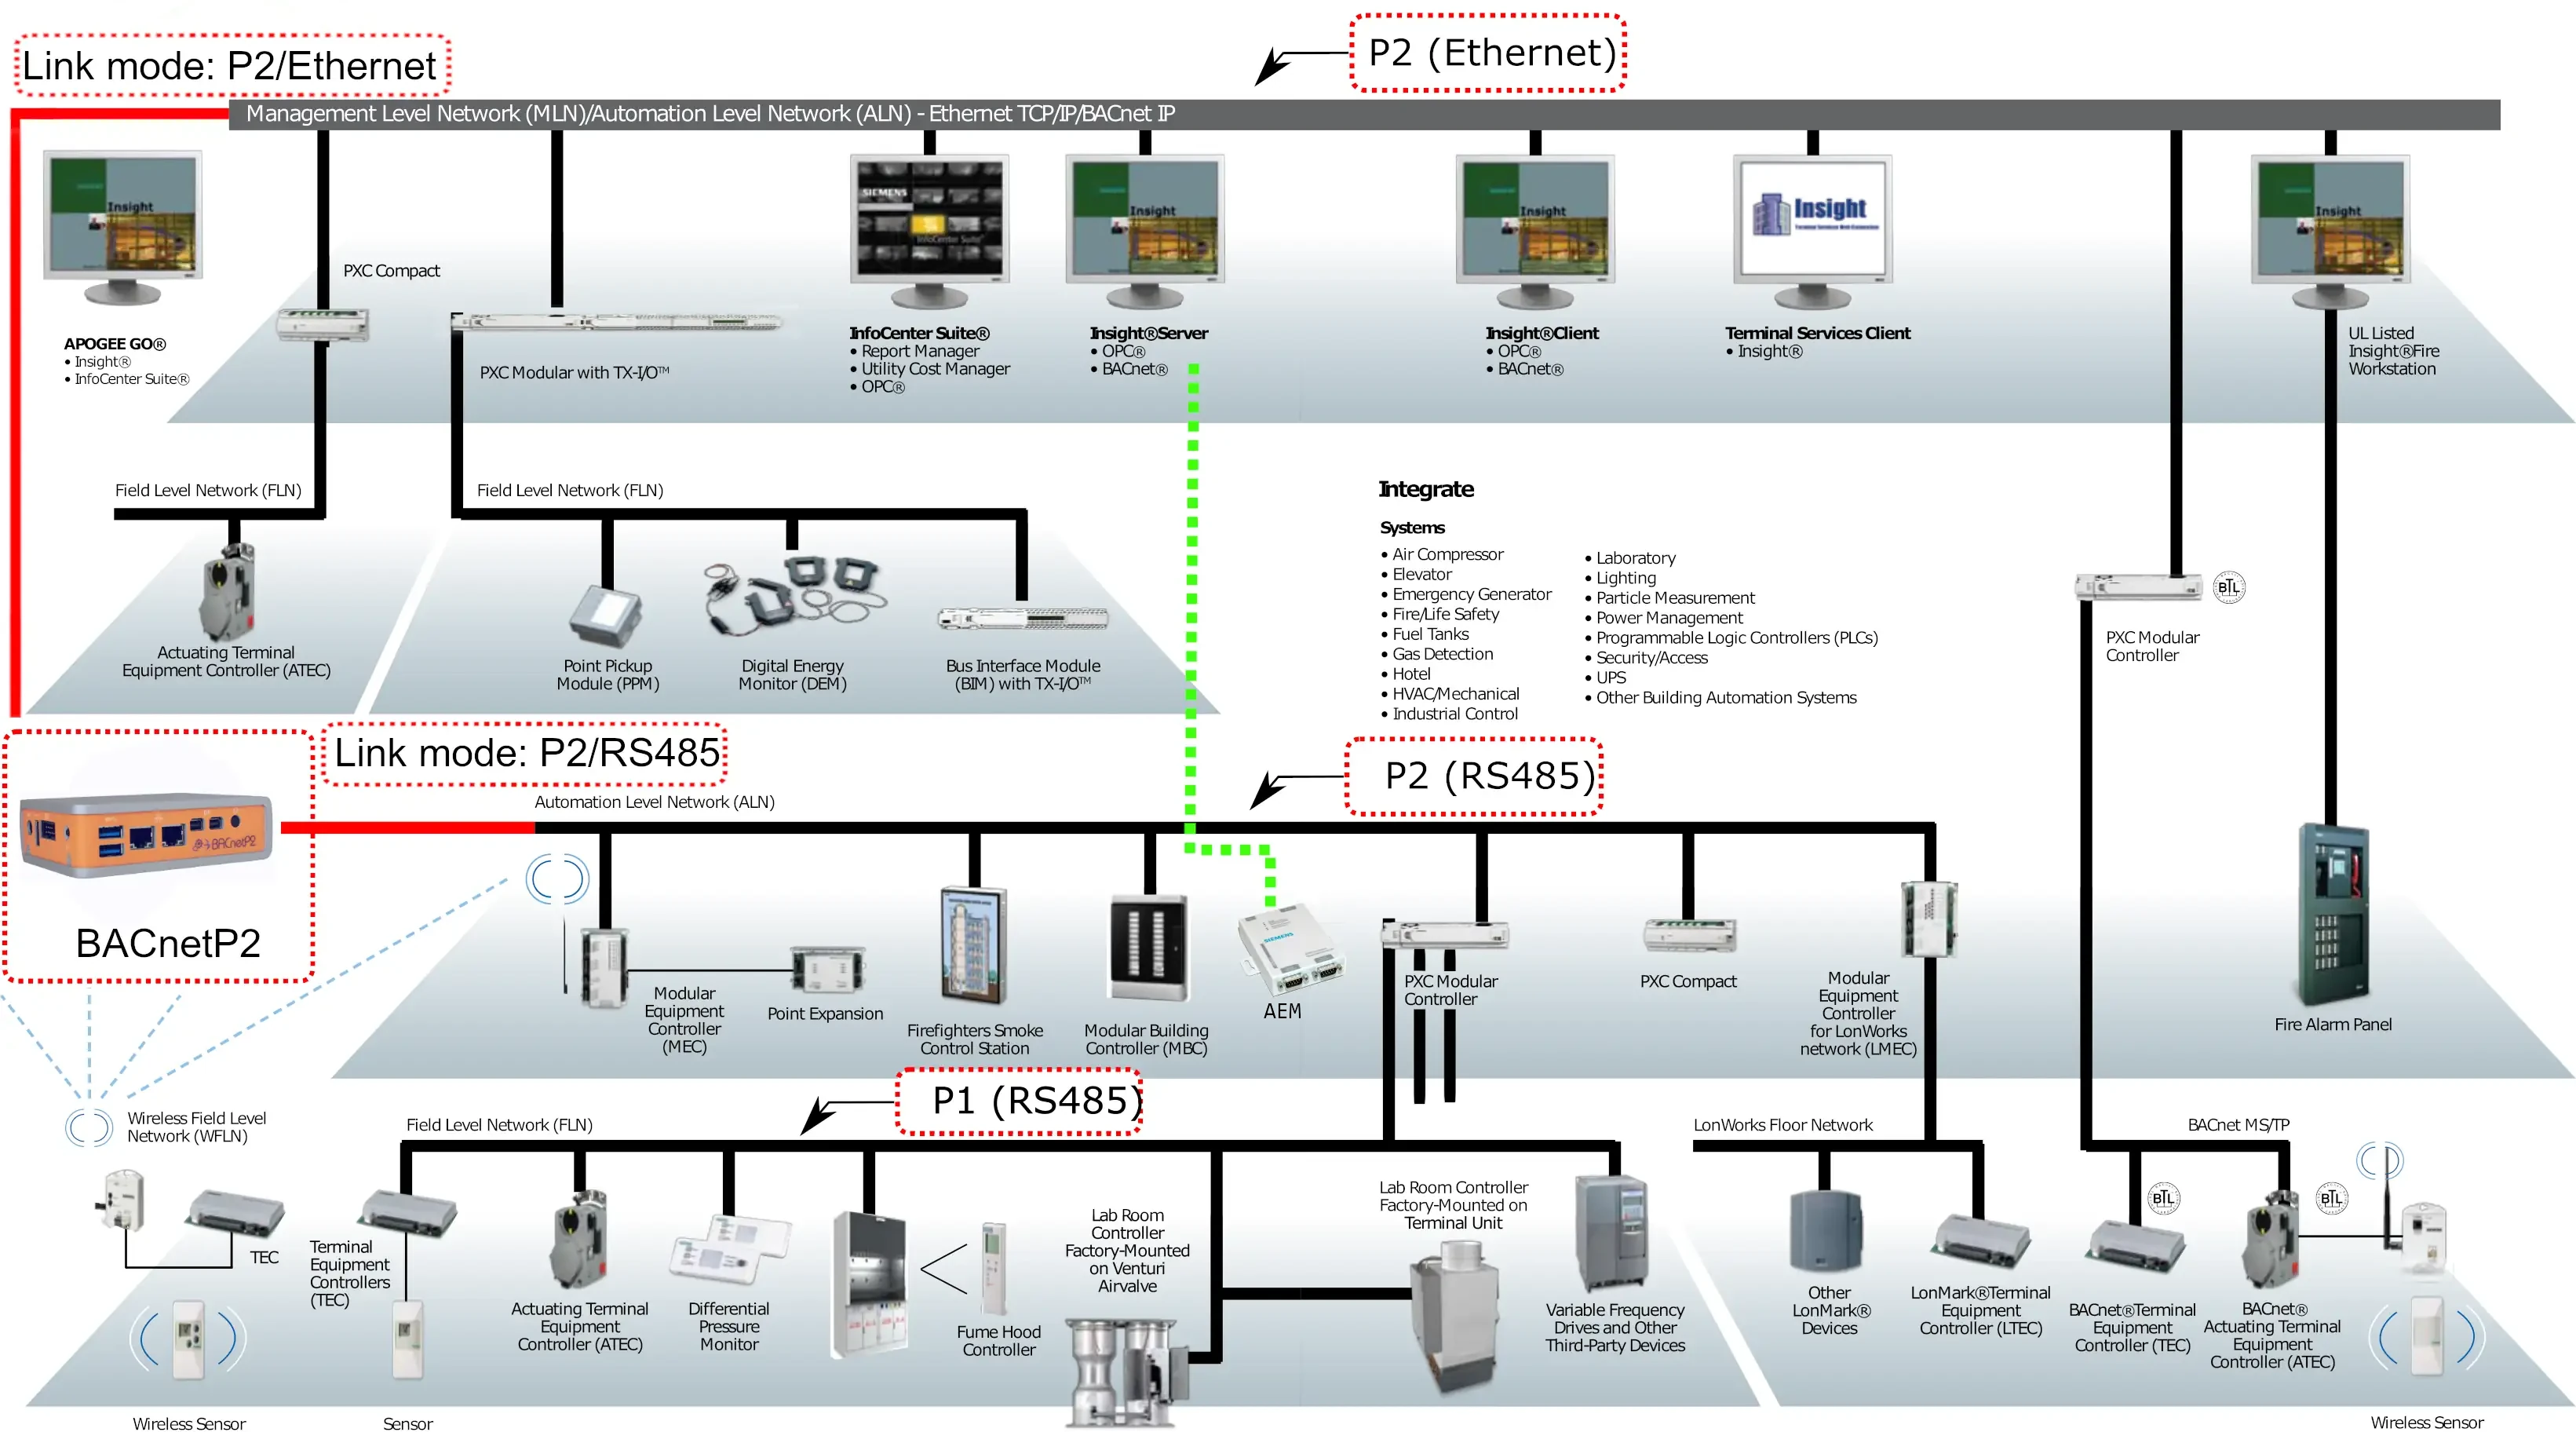 BACnetP2 integration with Siemens Systems